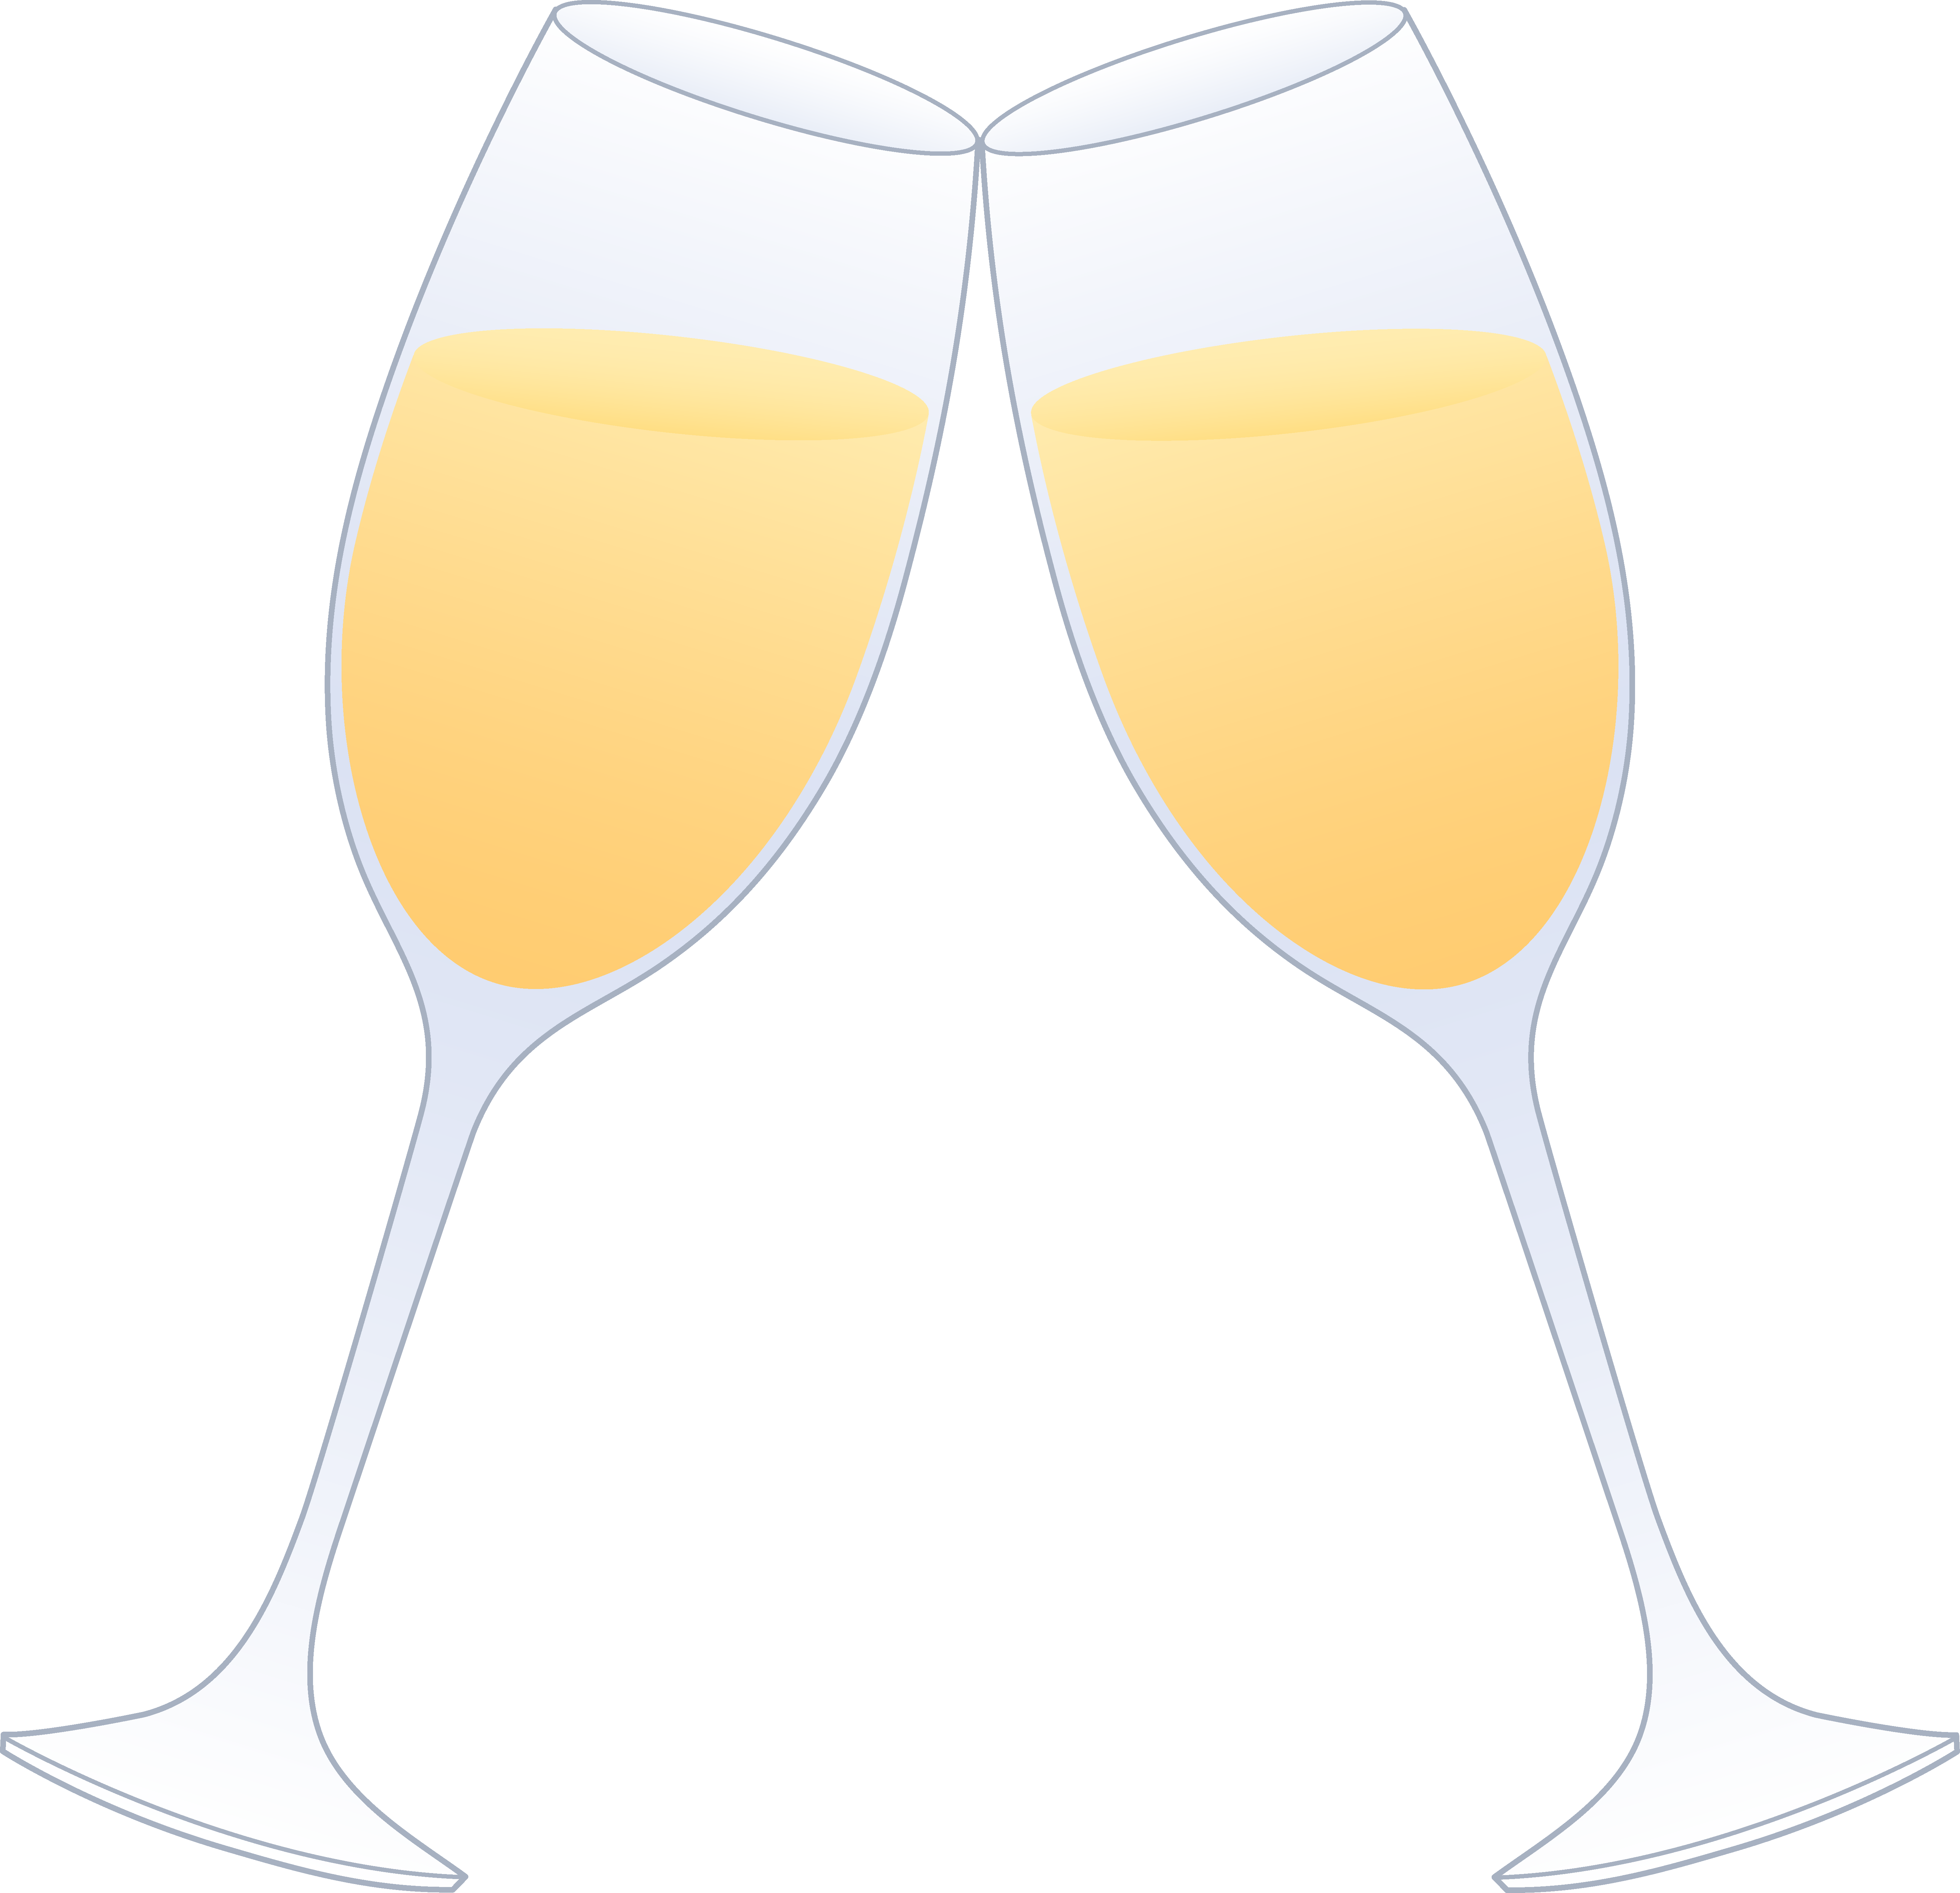 Glasses Of Champagne Clinking - Two Wine Glasses Clinking Cartoon (5905x5702)